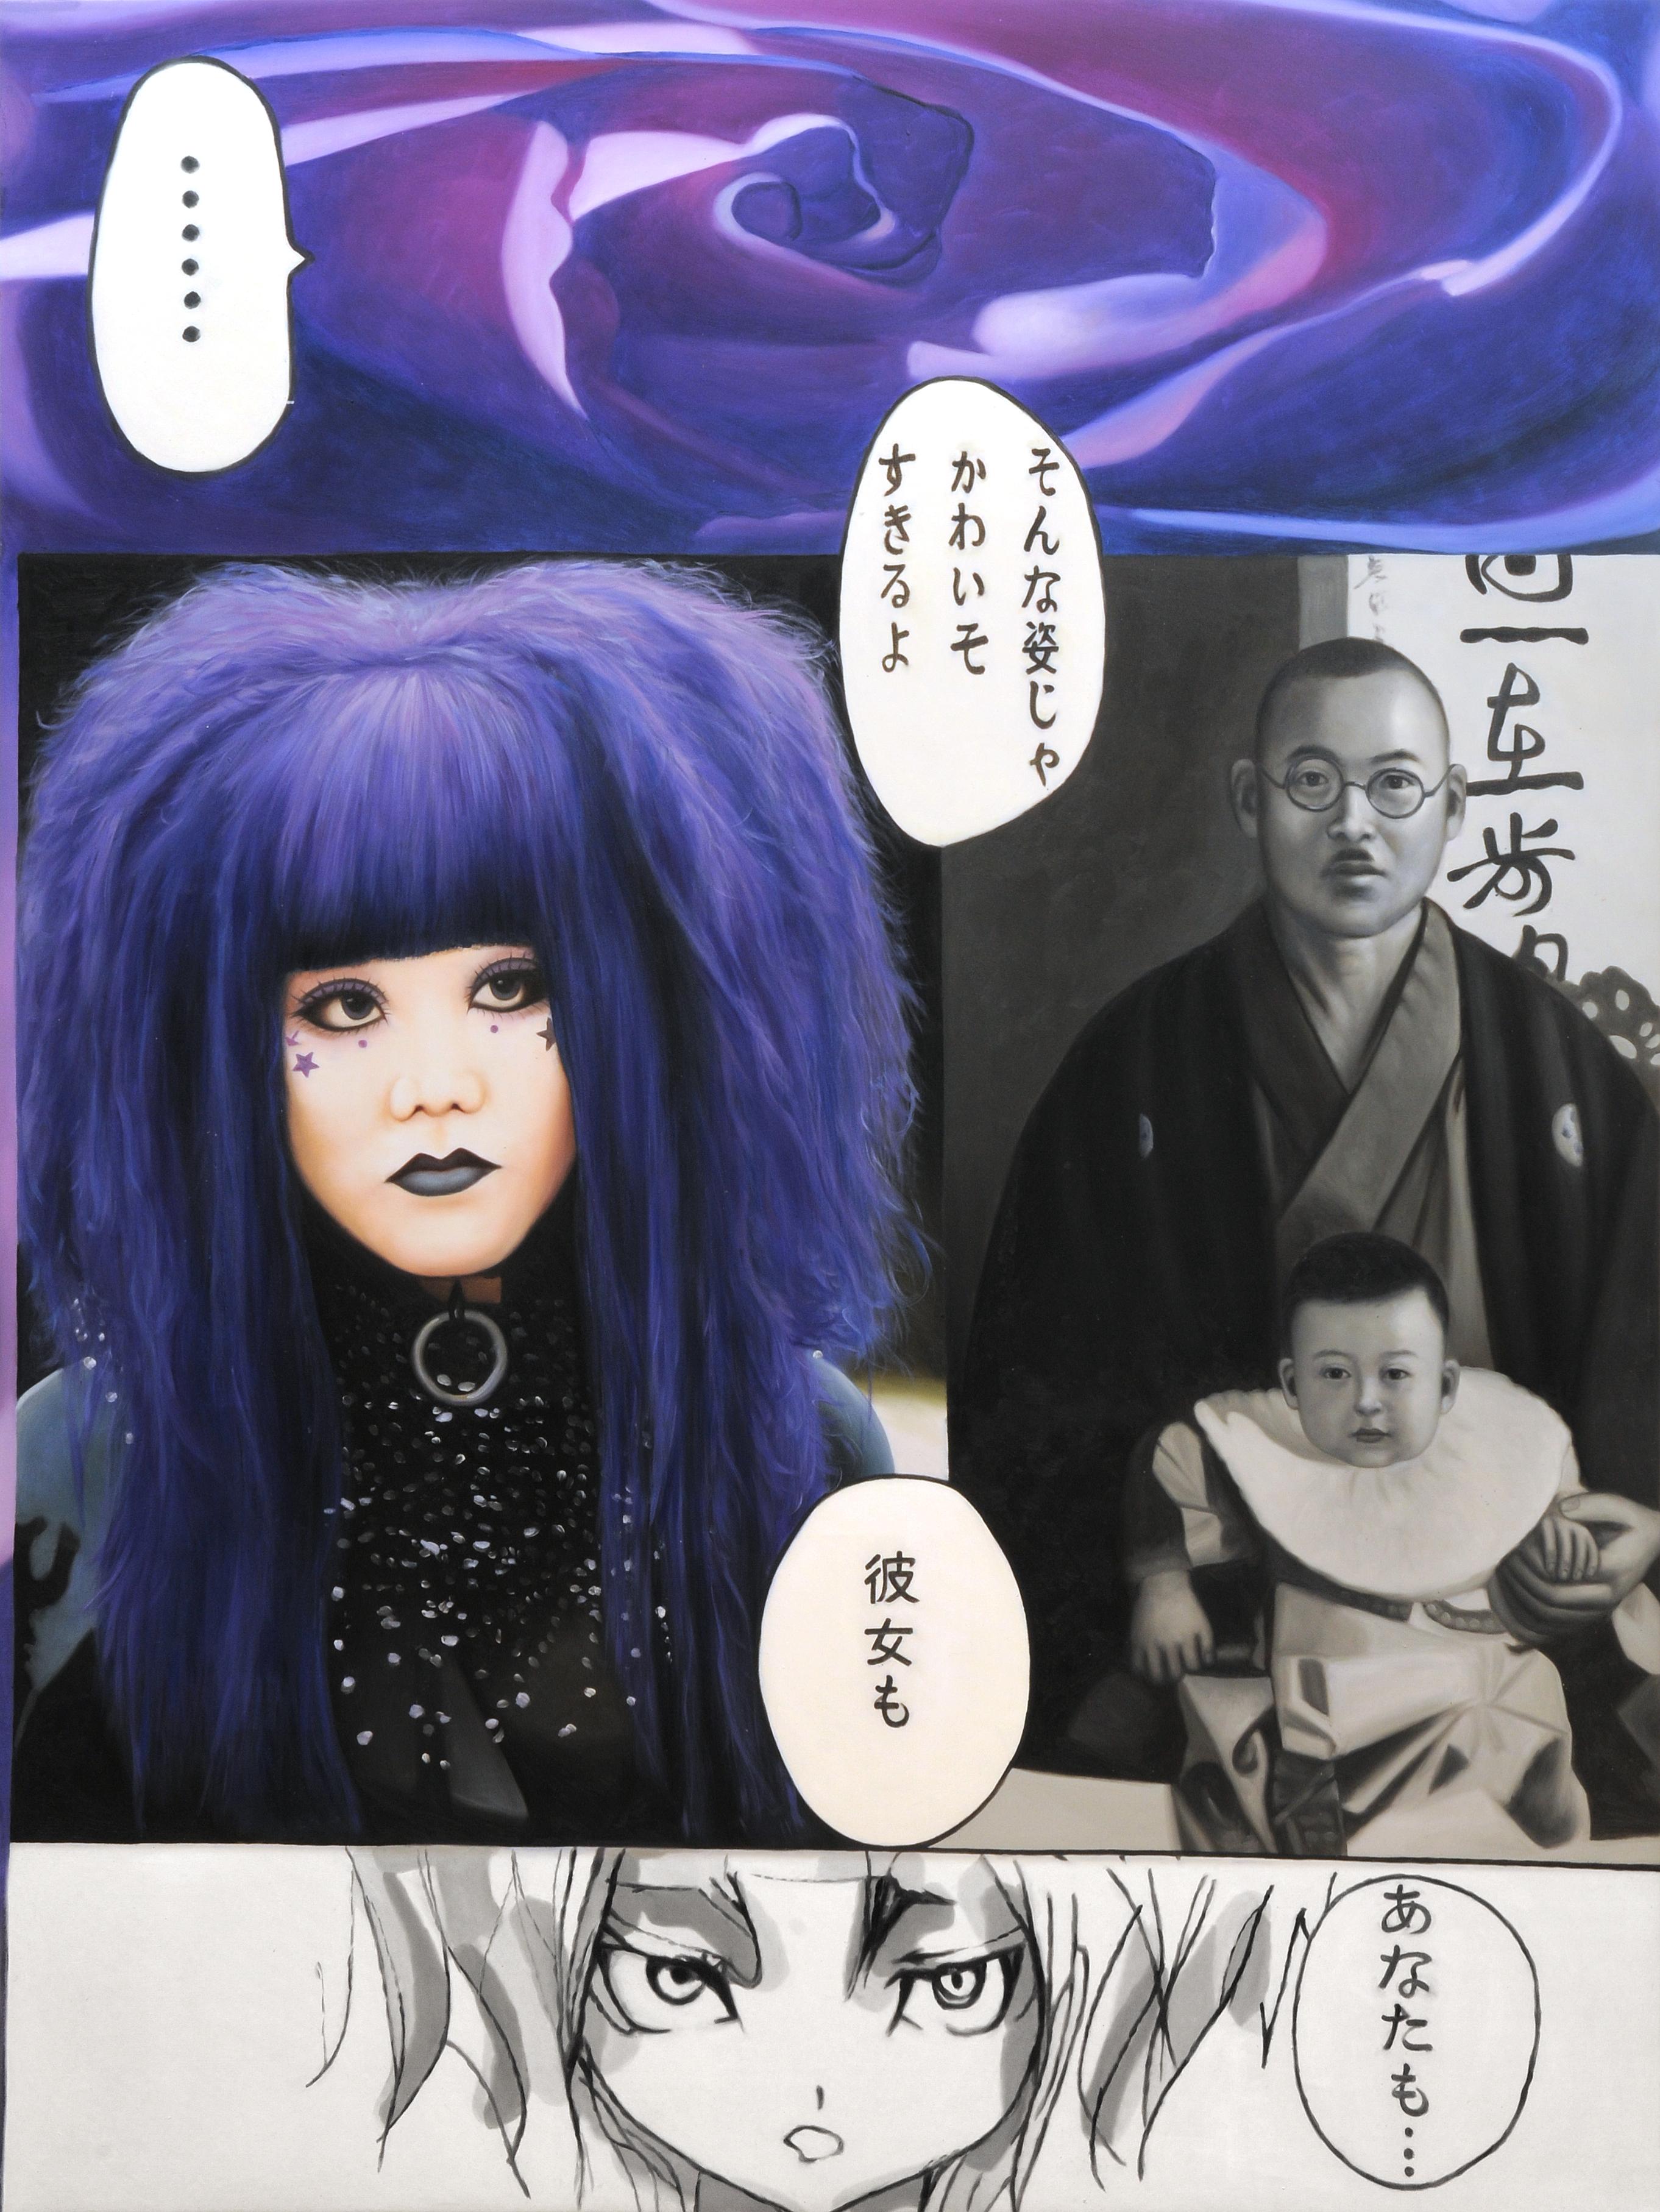 Purple Arlequin : Harajuku Rhapsody, The Enigmatic Dance of Colors - Painting by JIMMY YOSHIMURA